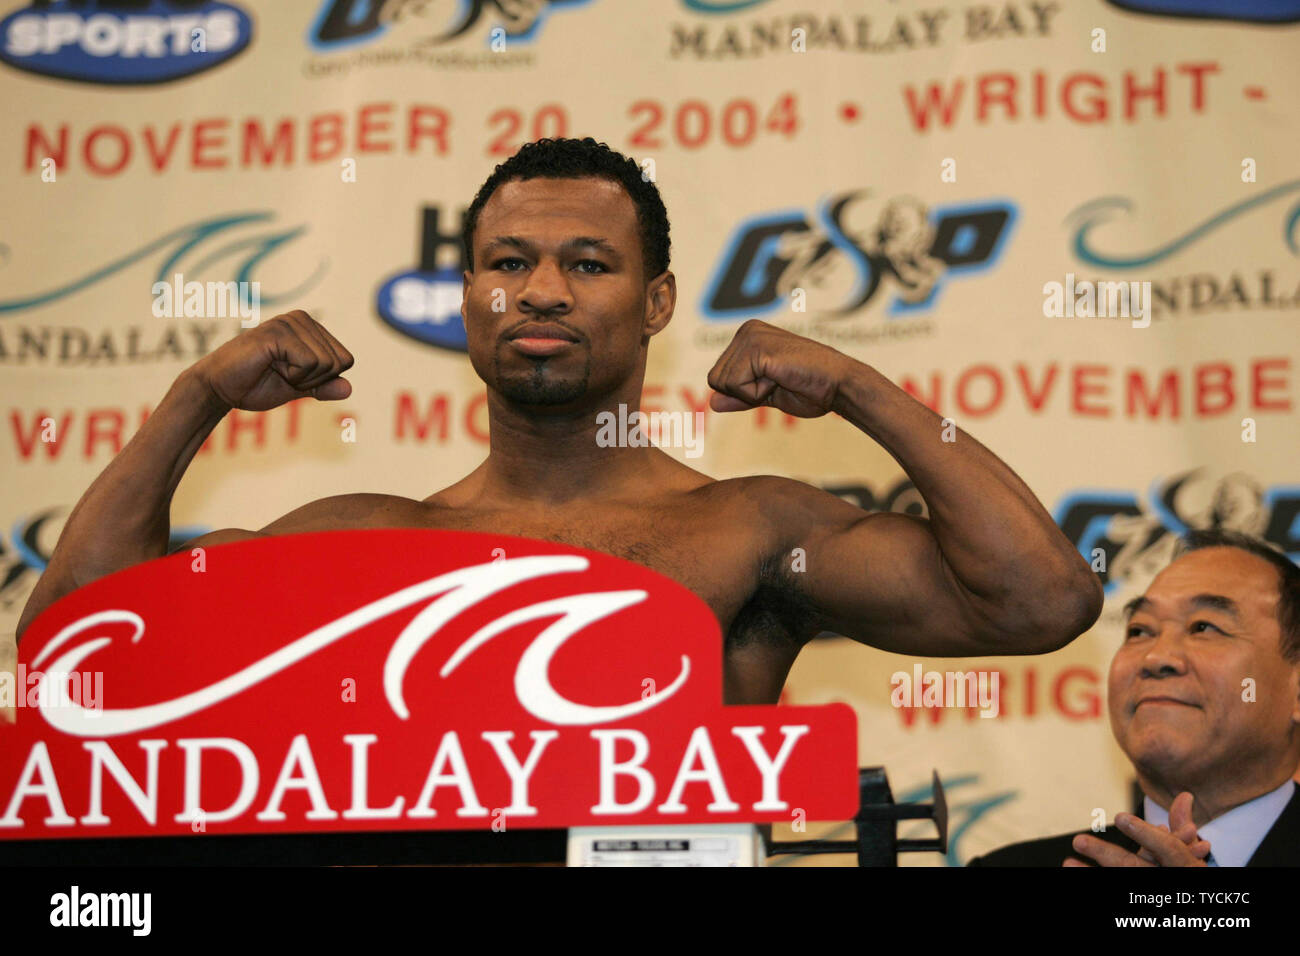 Sugar Shane Mosley shows off his muscles as he weighs in at 154 pounds for his November 20 title fight with Winky Wright at the Mandalay Bay in Las Vegas on November 19, 2004.   (UPI Photo/Roger Williams) Stock Photo